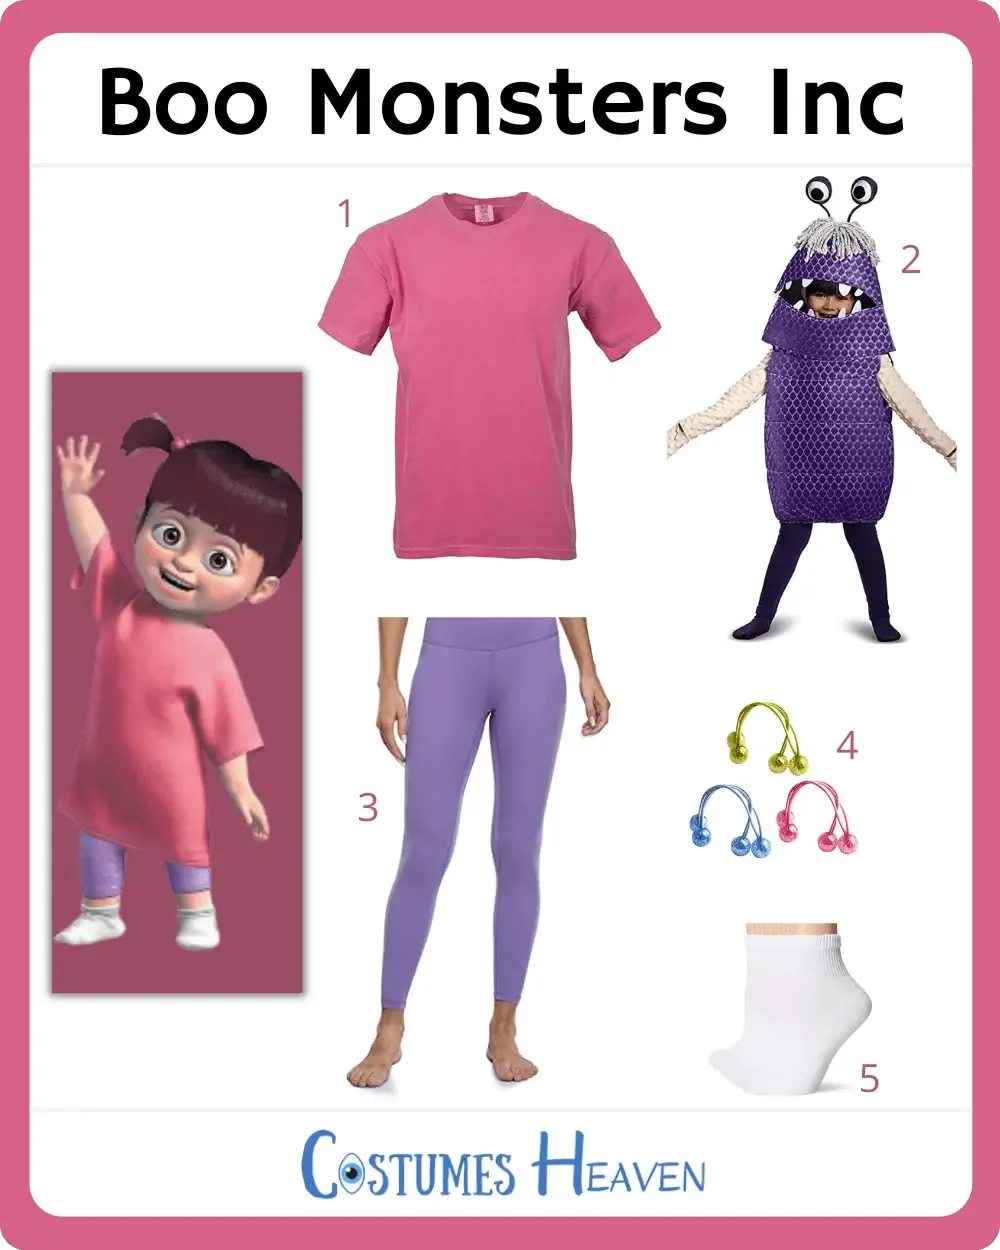 Boo Monsters, Inc. Costume